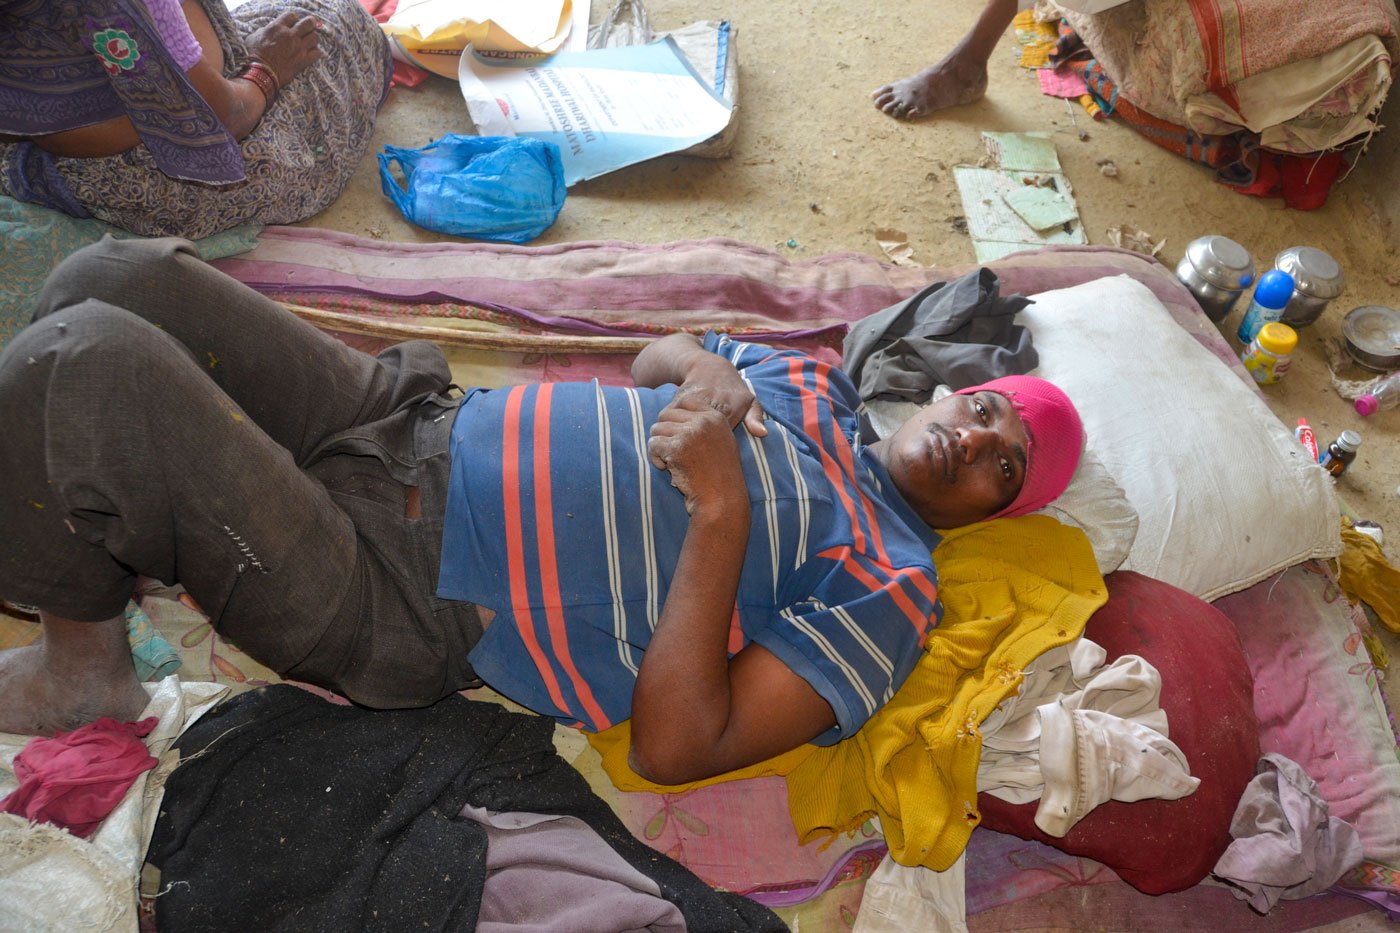 Sandeep is bedridden, paralysed from the waist down. Shantabai is worried about finding food to feed him (file photo)